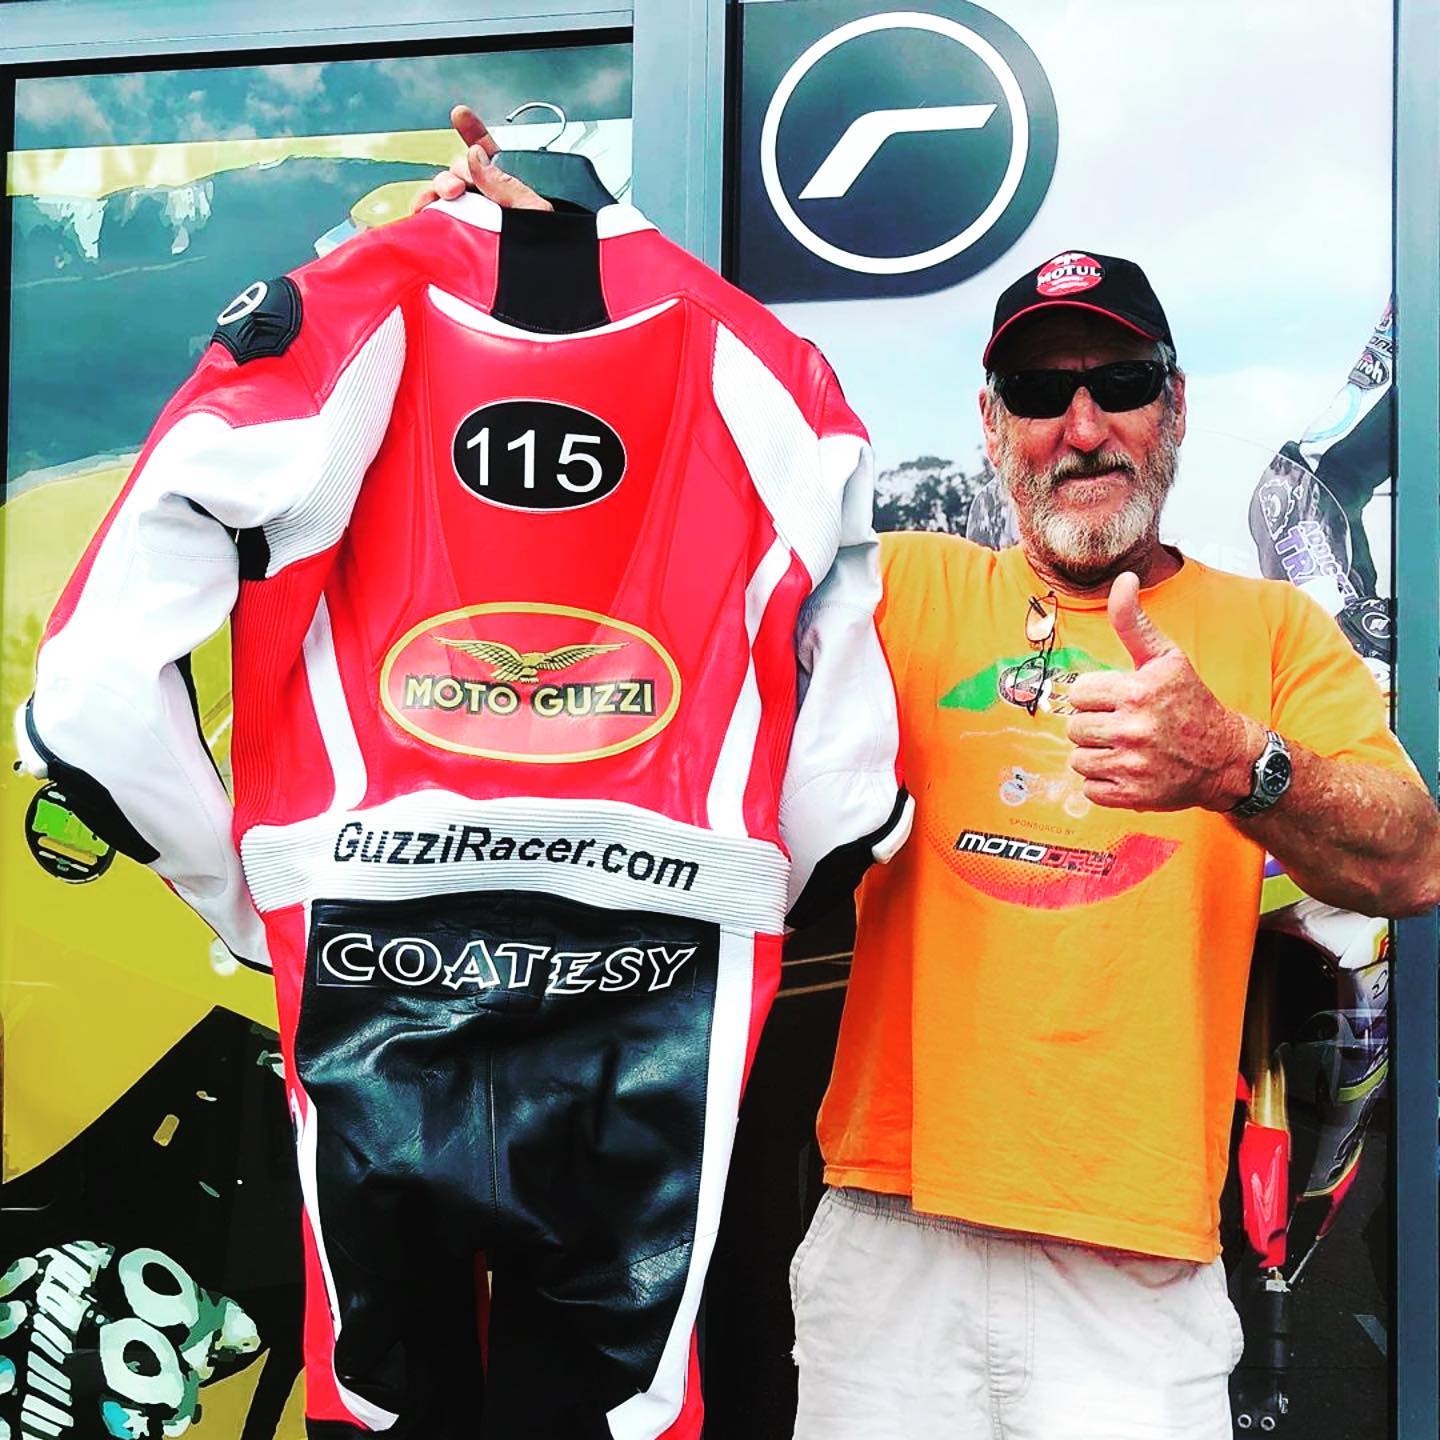 @ricondi ・・・
😎 Dear Guzzi Man Mike. Your brand new super cool custom Moto Guzzi Roo suit is finished & on its way to you.  We feel however that this suit may give you a MASSIVE advantage over all other racing competitors out there, including yours truly.  We look forward to the final round of racing next weekend and the Redax LAVERDA catching you out on track 🤩 @guzziraceraustralia